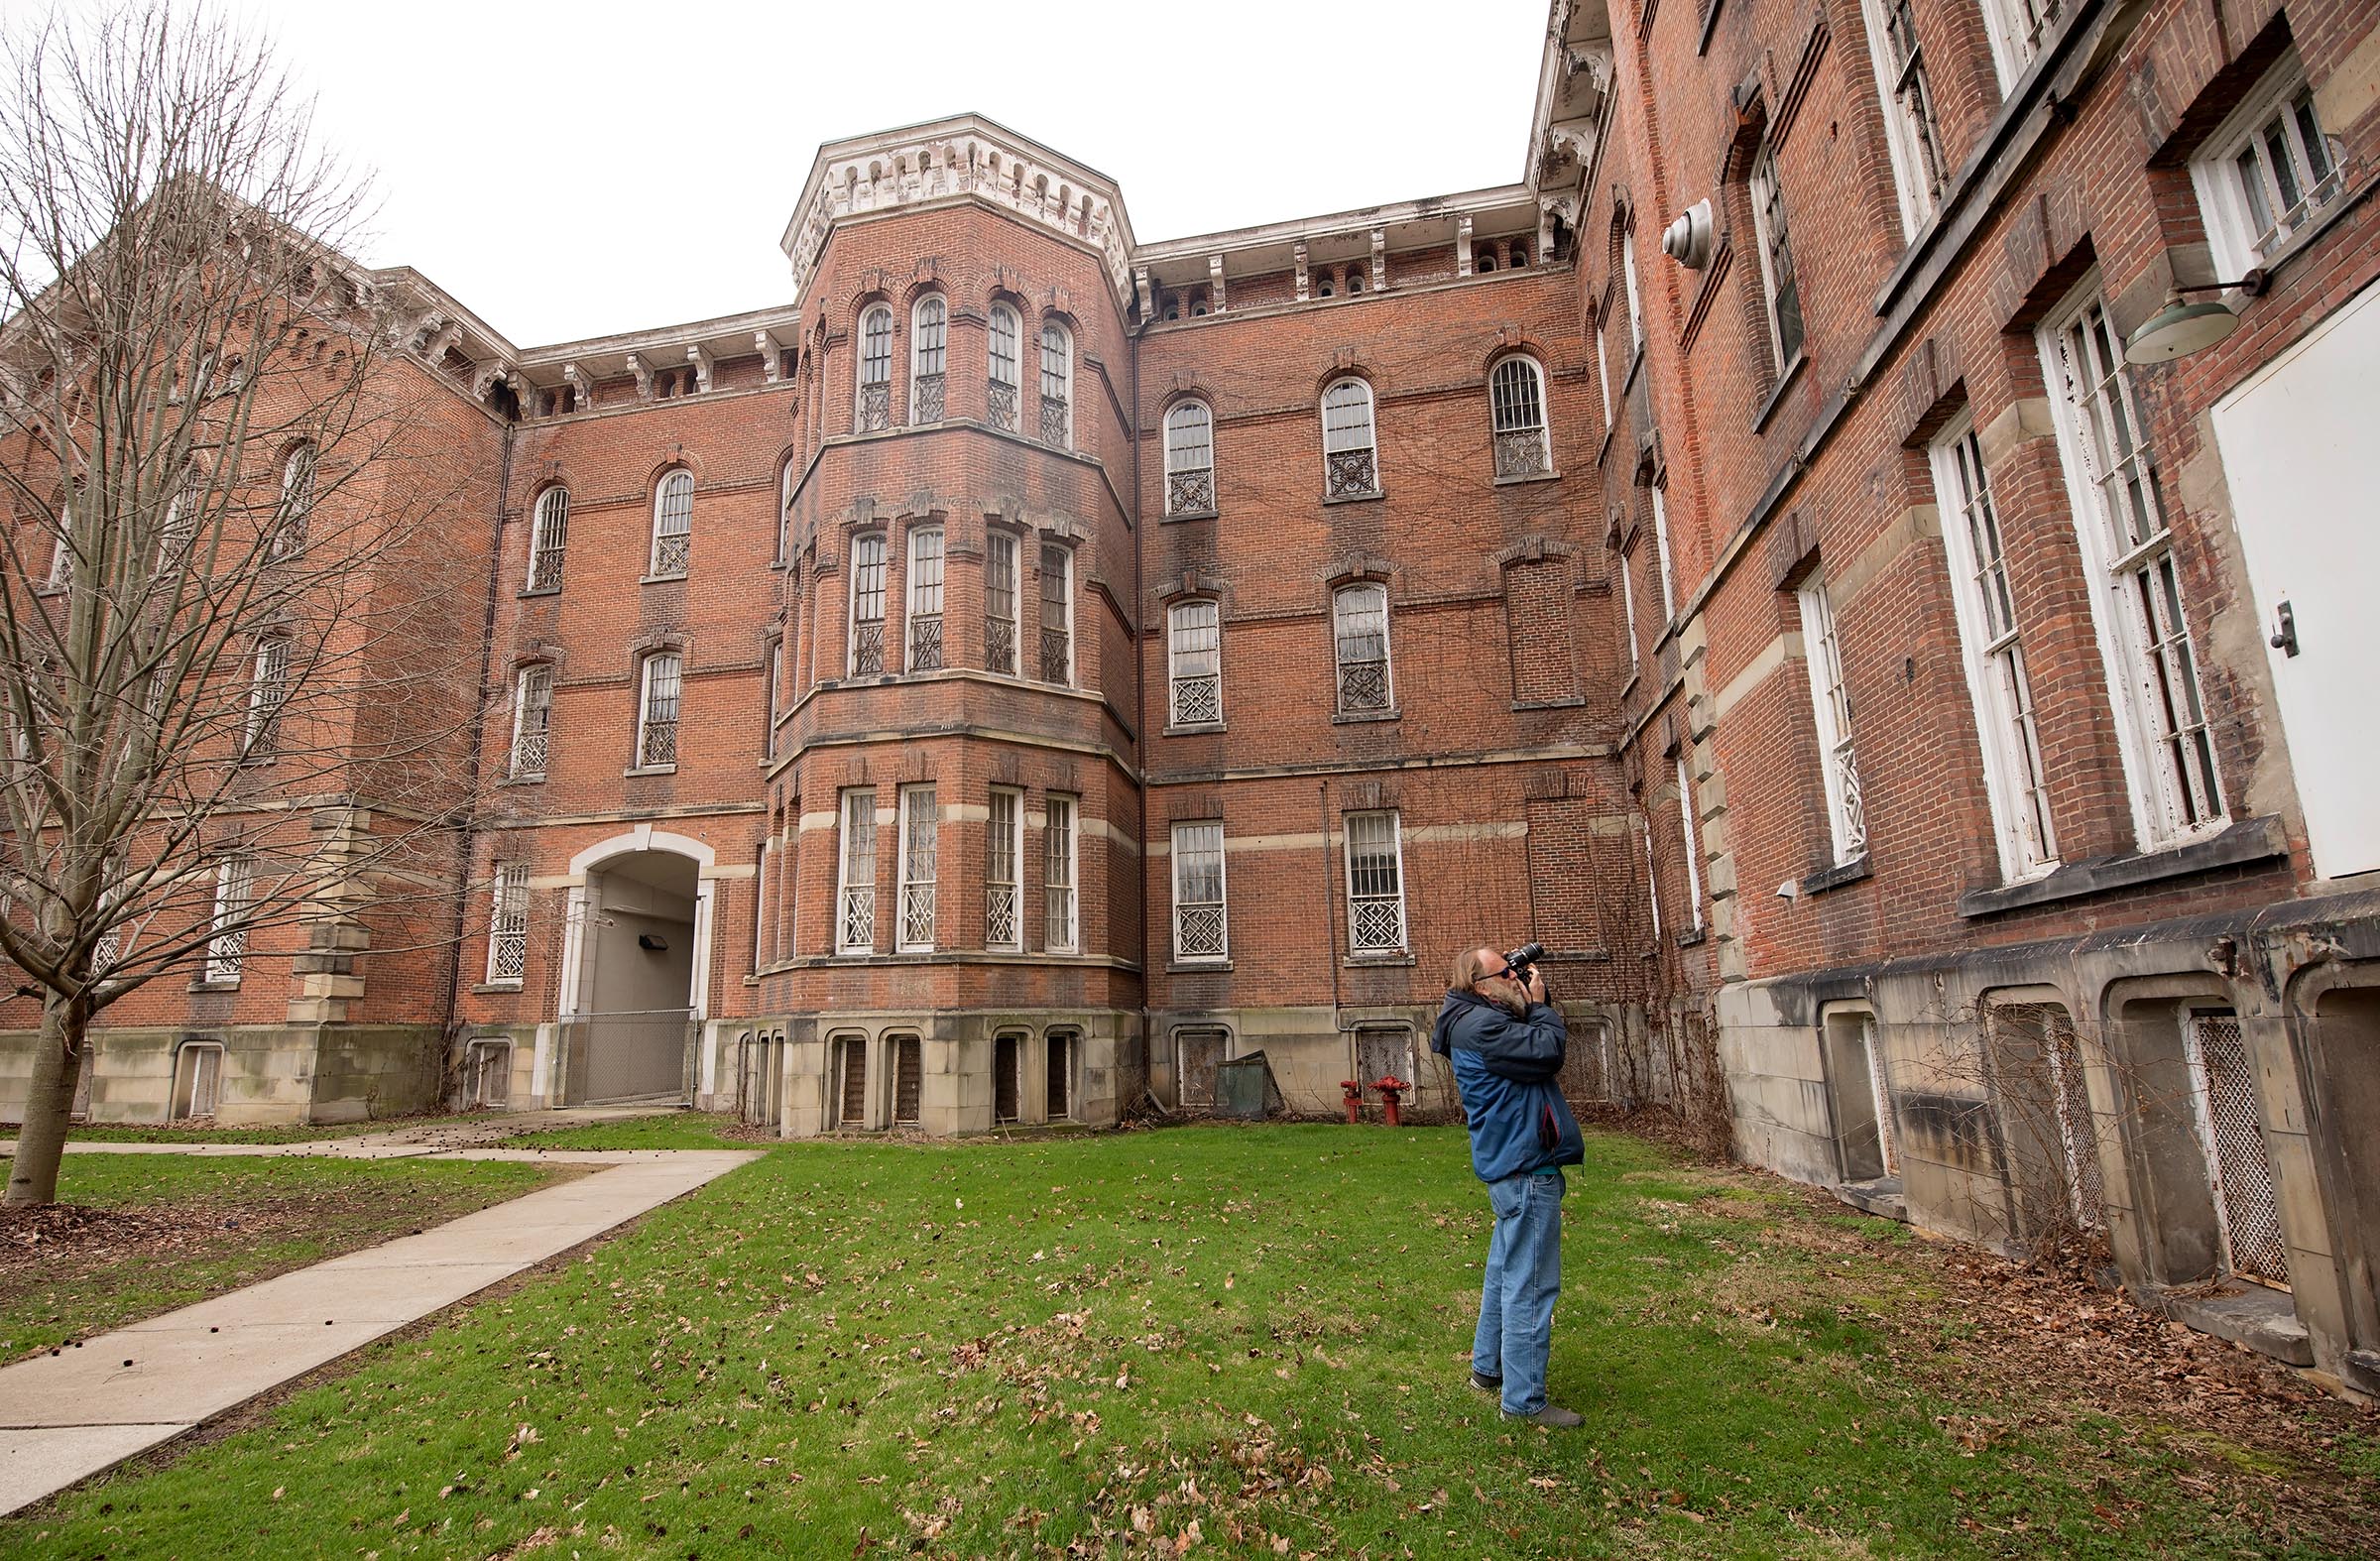 Pete Wuscher takes photos at The Ridges. The part of the building he is photographing is where he spent some time as a patient in the 1980's.